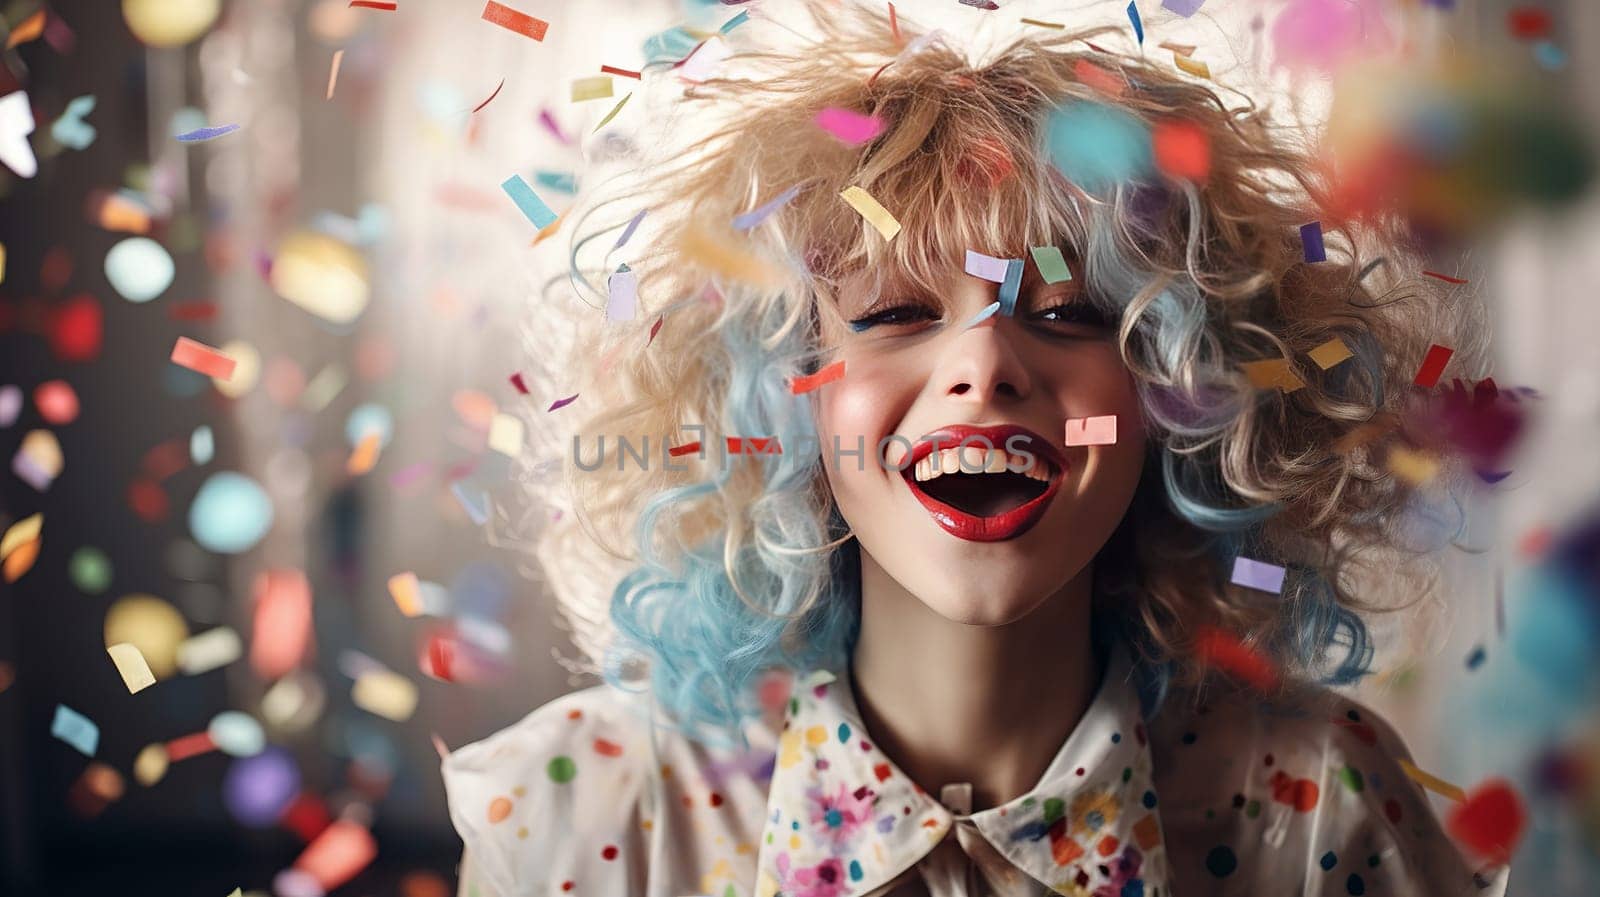 Joyful girl with curly hair and flying confetti around. Concept festive atmosphere. Ai art. High quality photo